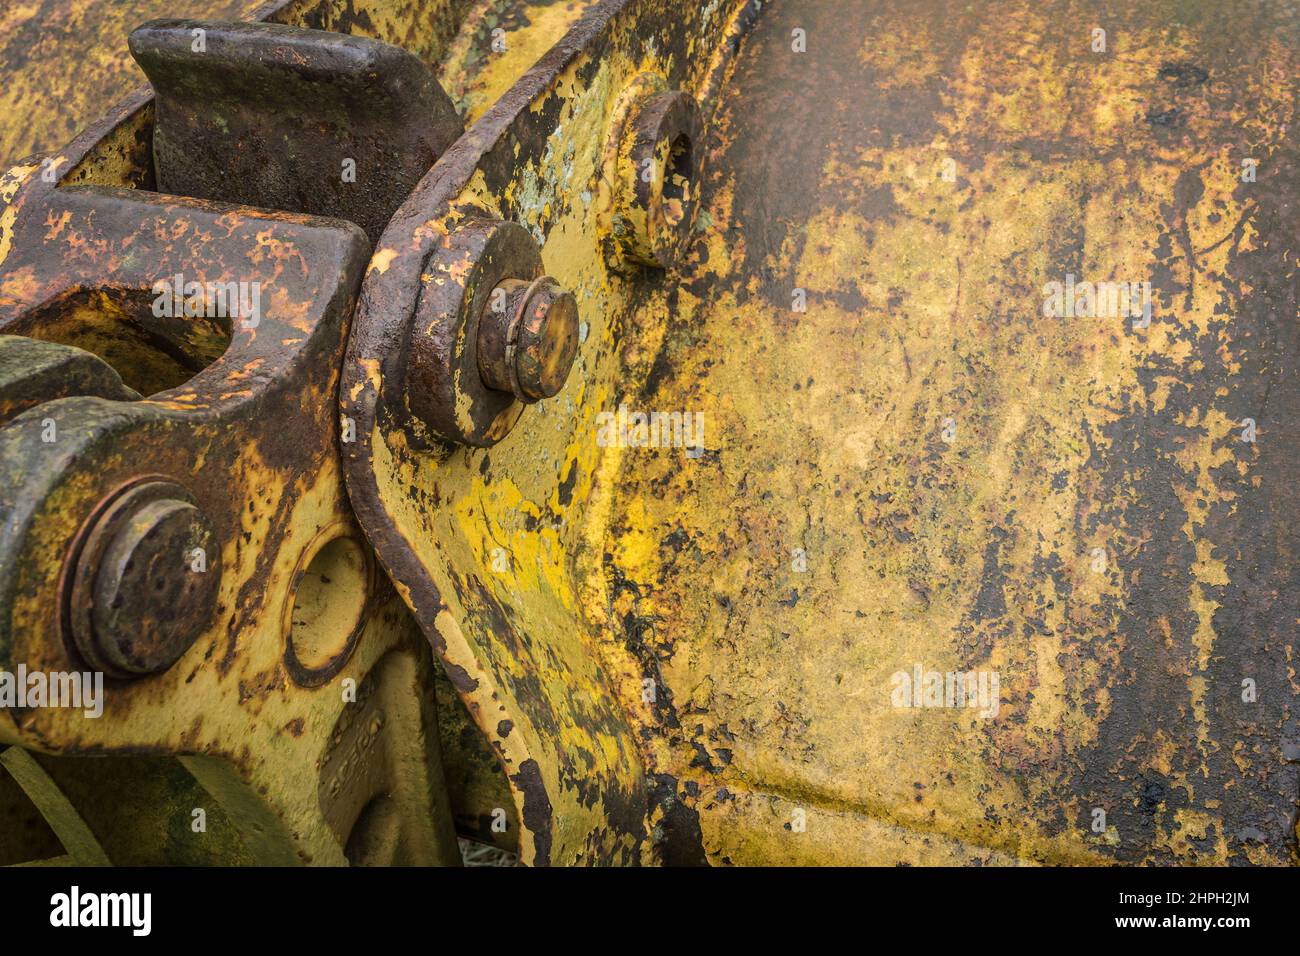 detail of an old digging machine Stock Photo